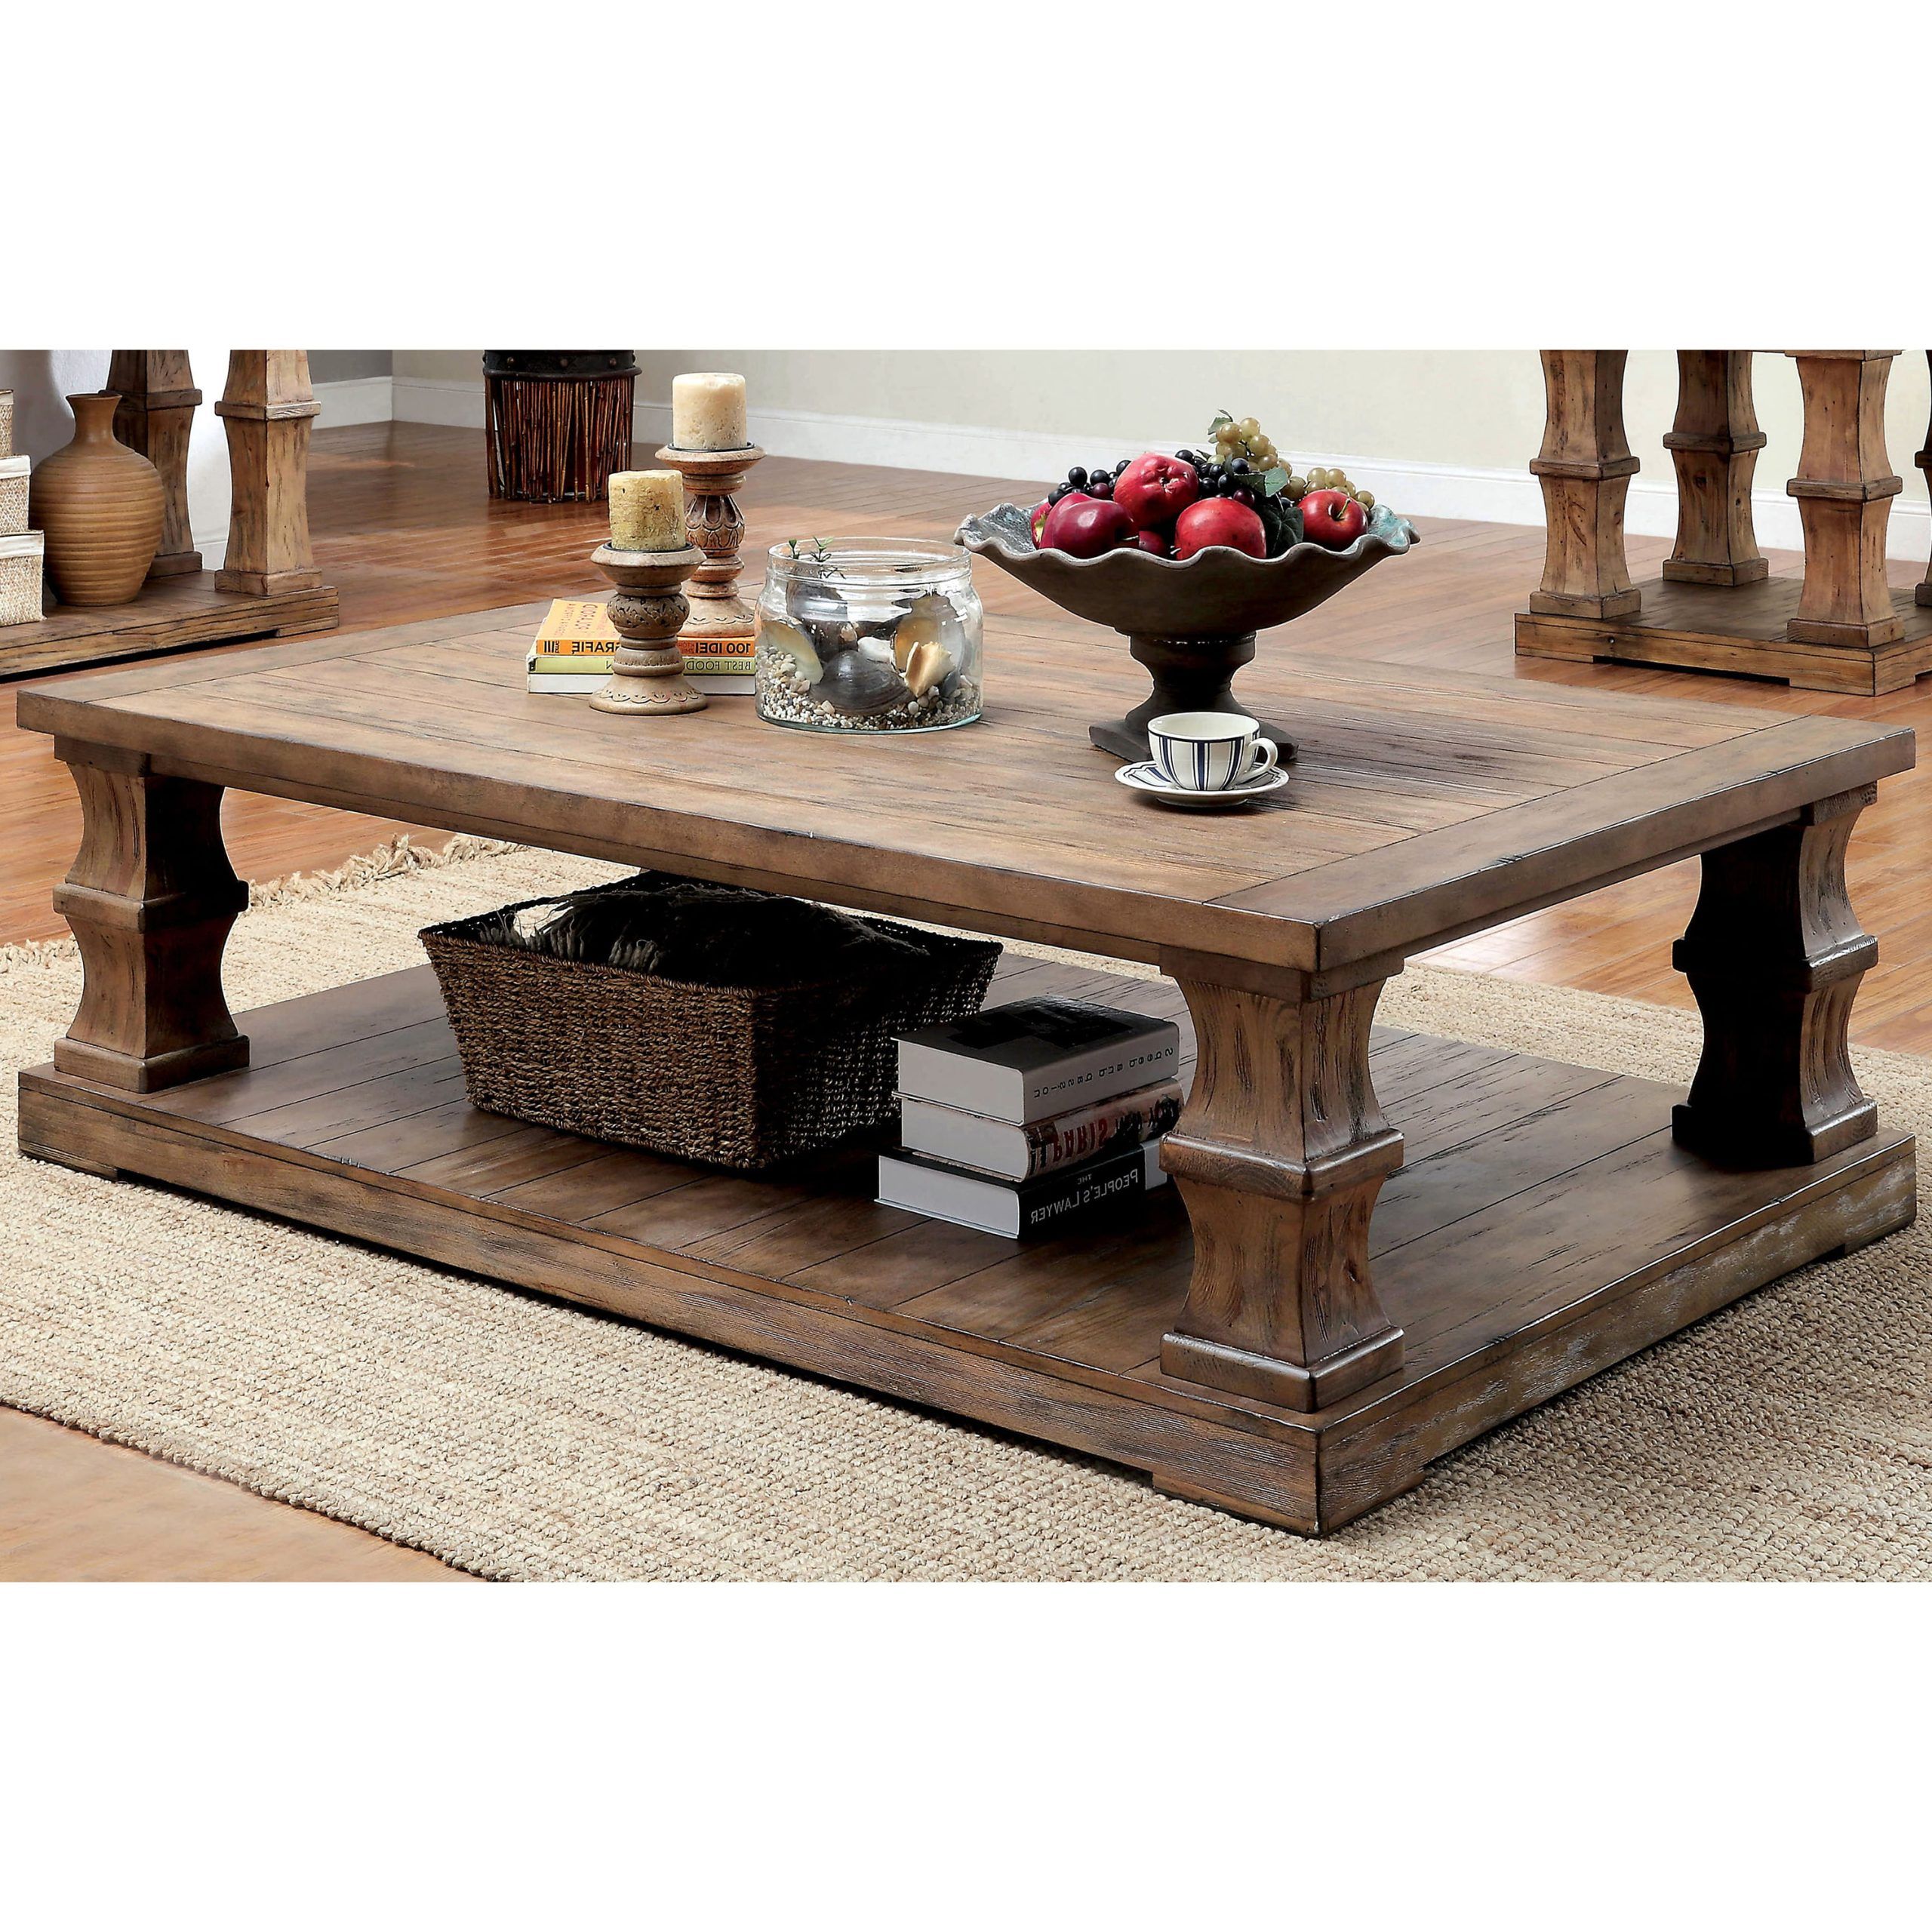 Furniture Of America Bonita Transitional Coffee Table, Natural Tone With Regard To Well Liked Transitional Square Coffee Tables (View 8 of 15)